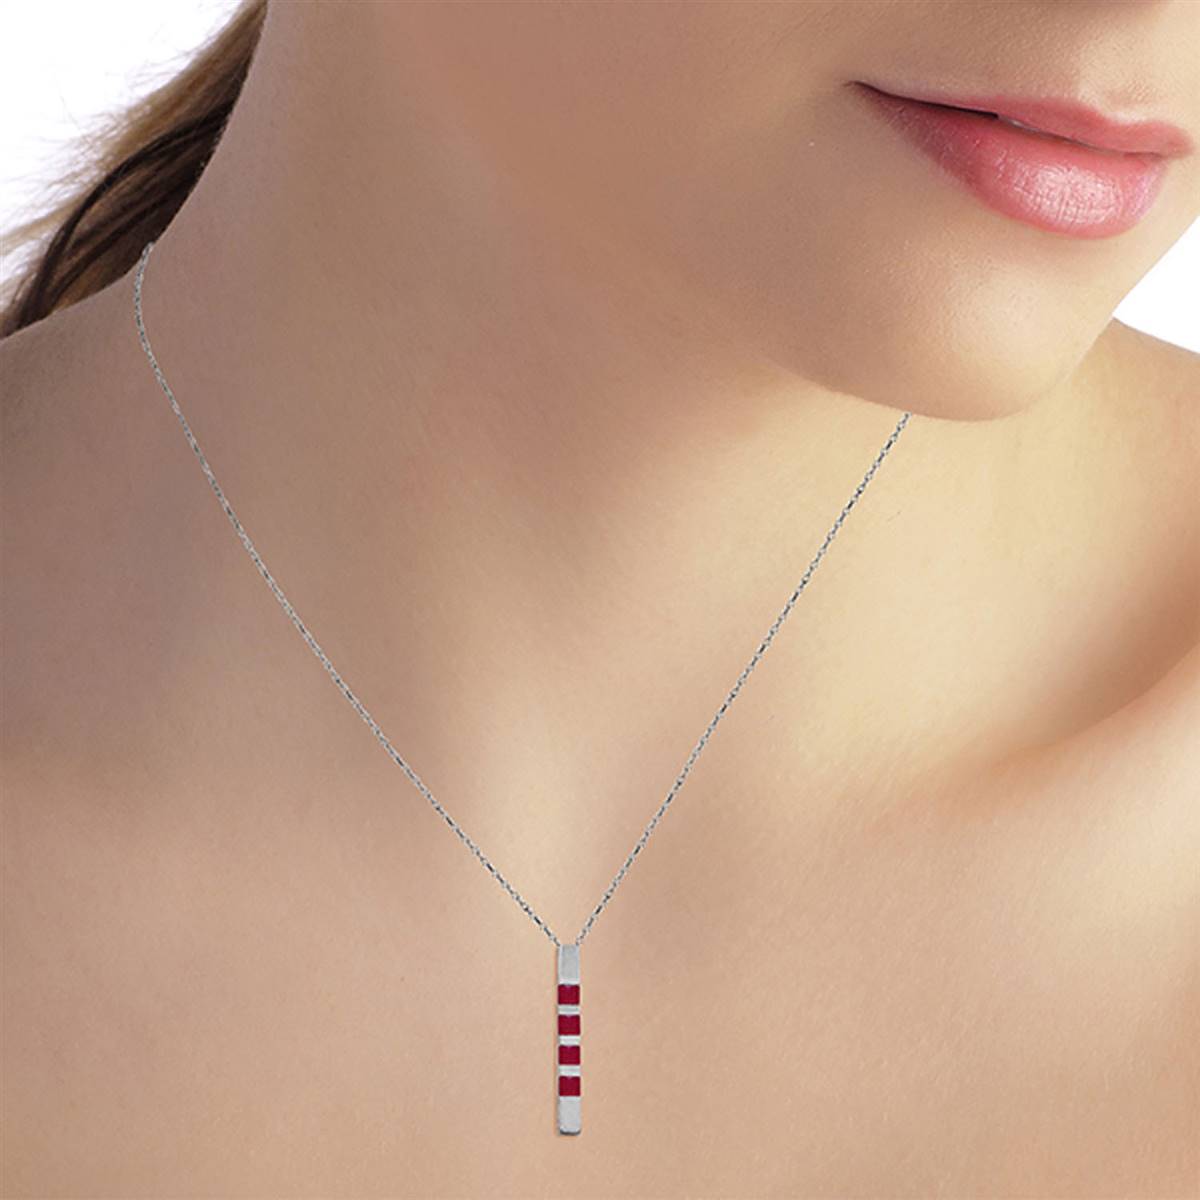 0.35 Carat 14K Solid White Gold Necklace Bar Natural Ruby